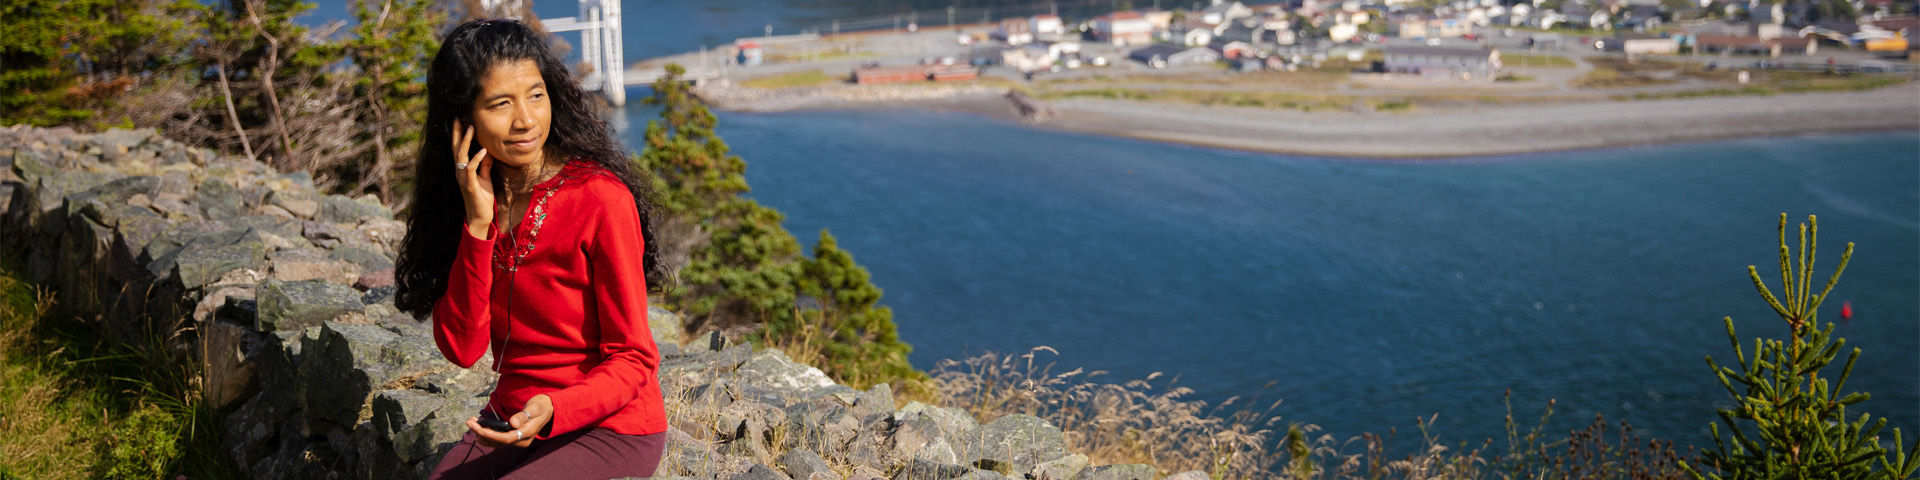 a person listening to an audio device, sits on a stone wall overlooking a coastal town